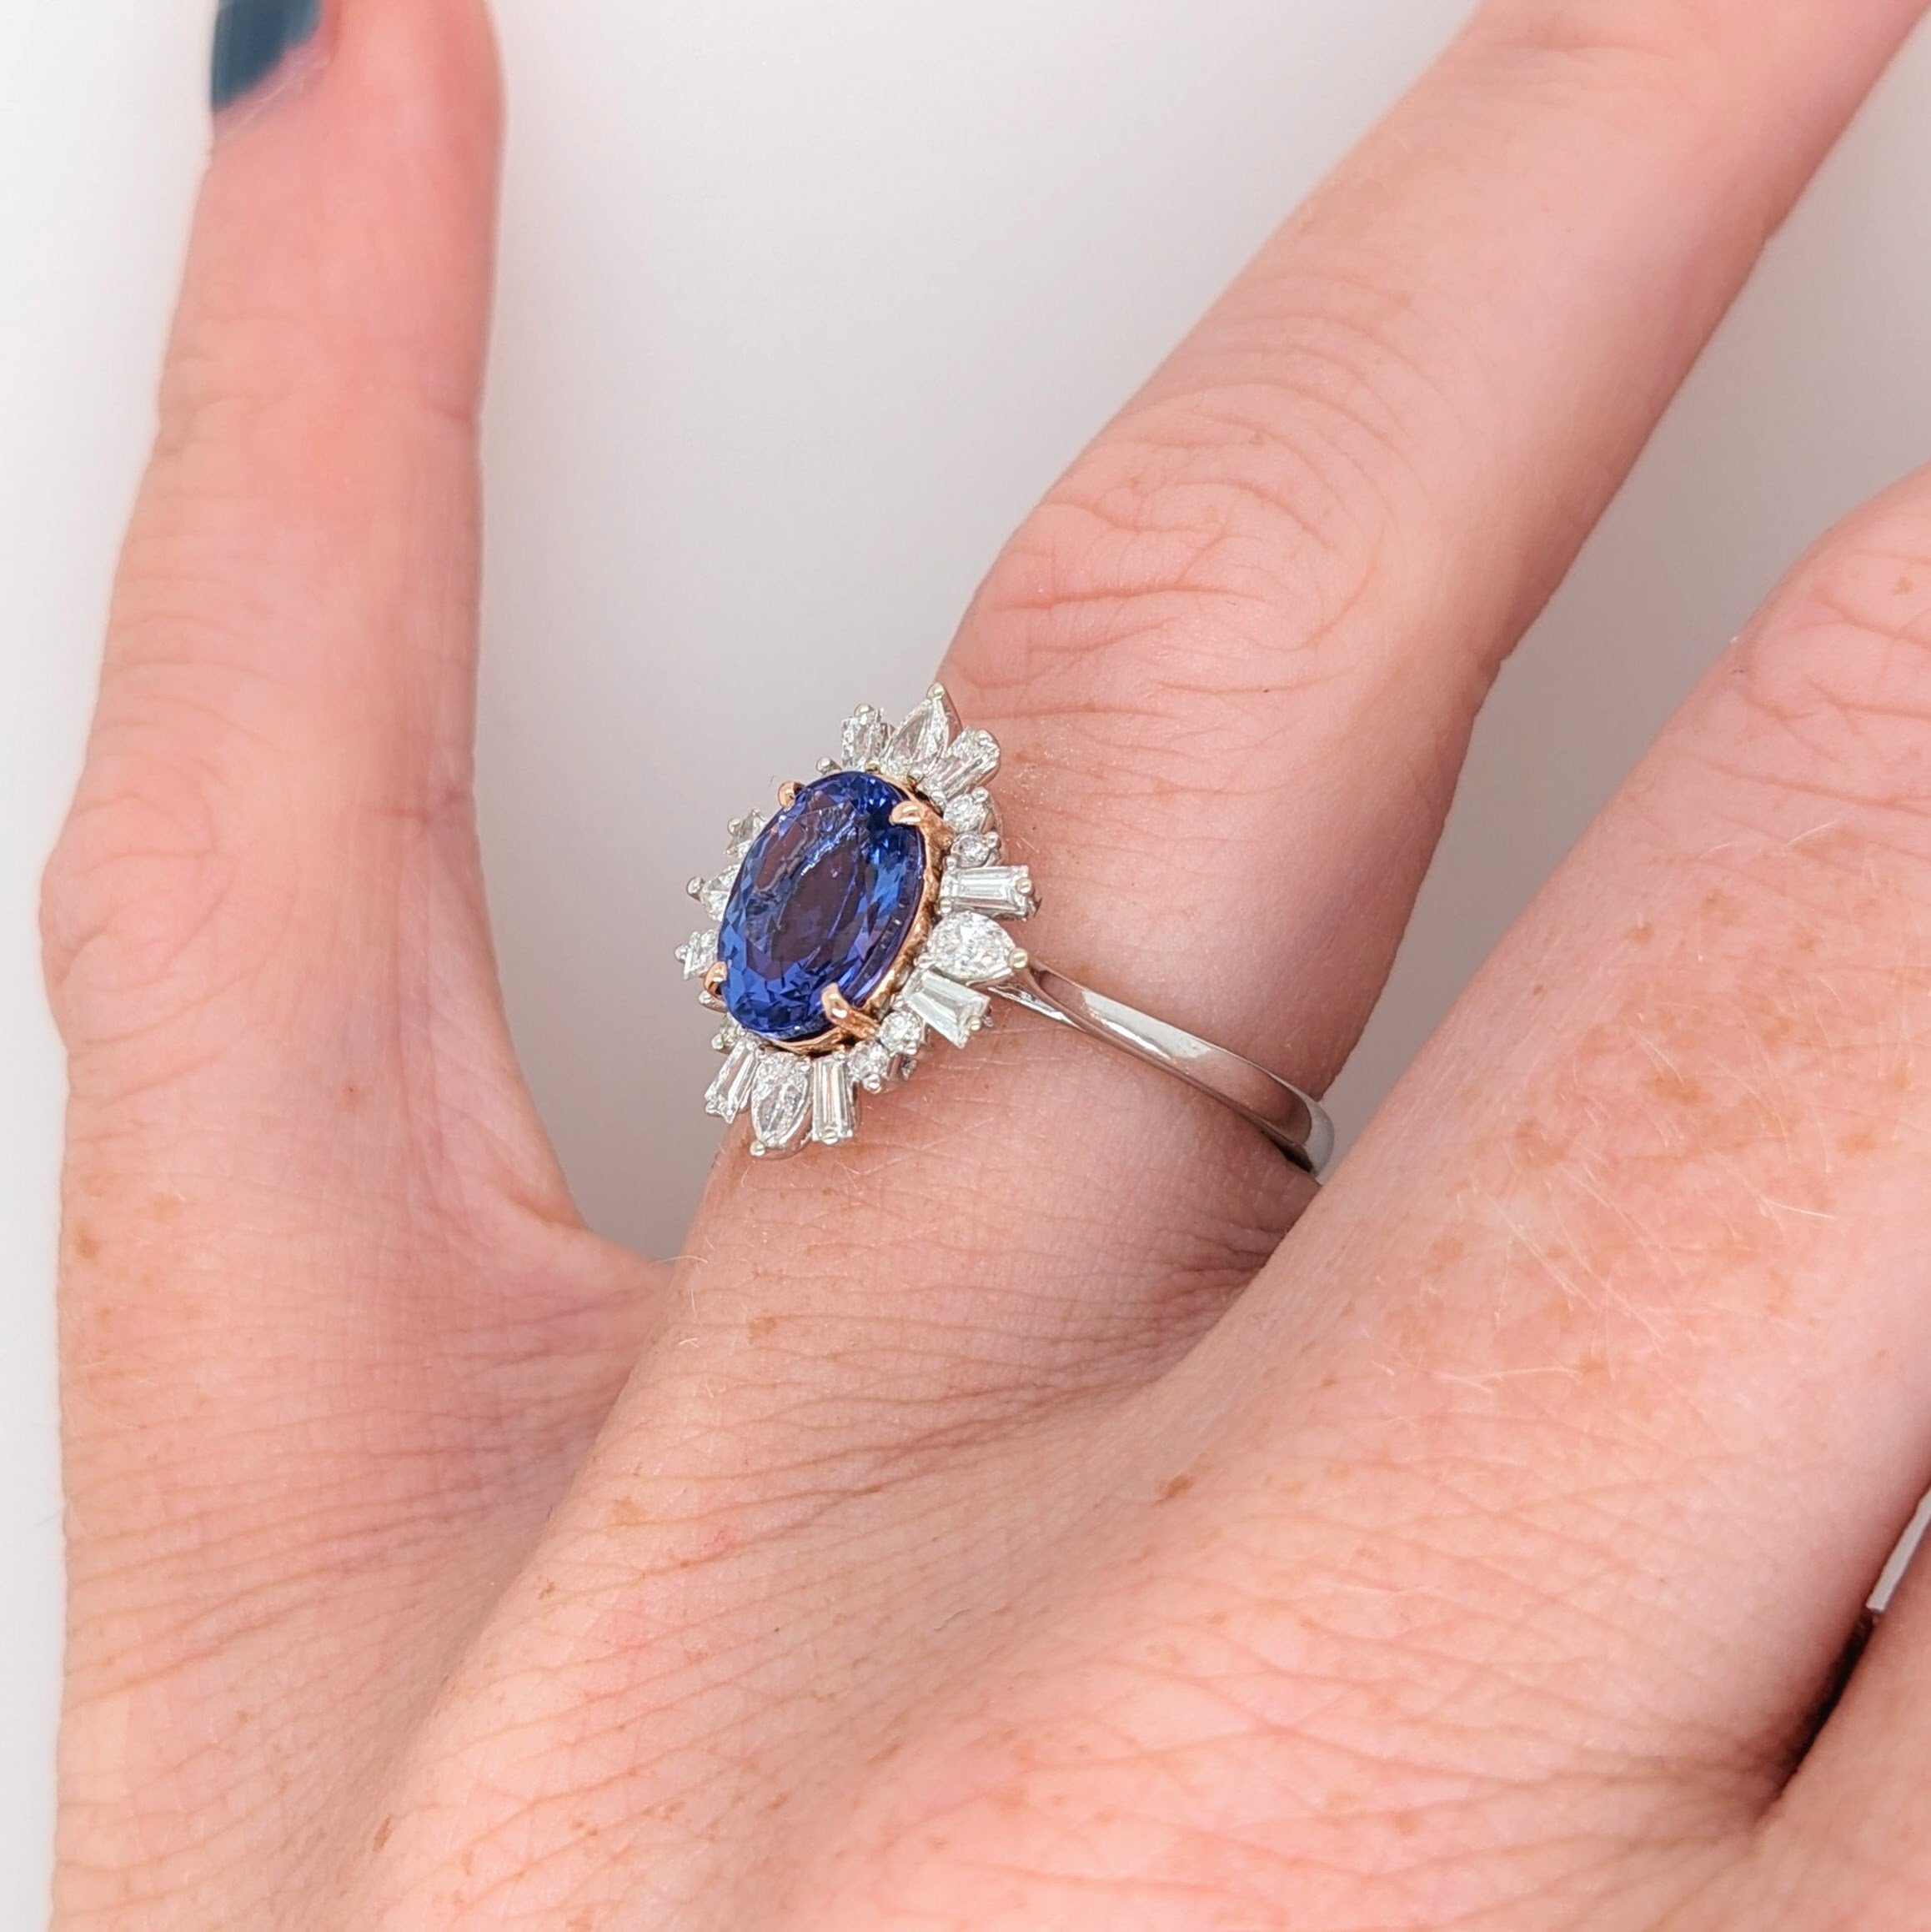 Gorgeous Tanzanite Sunburst Ring in 14K Solid White and Rose Gold w Natural Diamond Accents | Oval 9x7mm | December Birthstone Ring